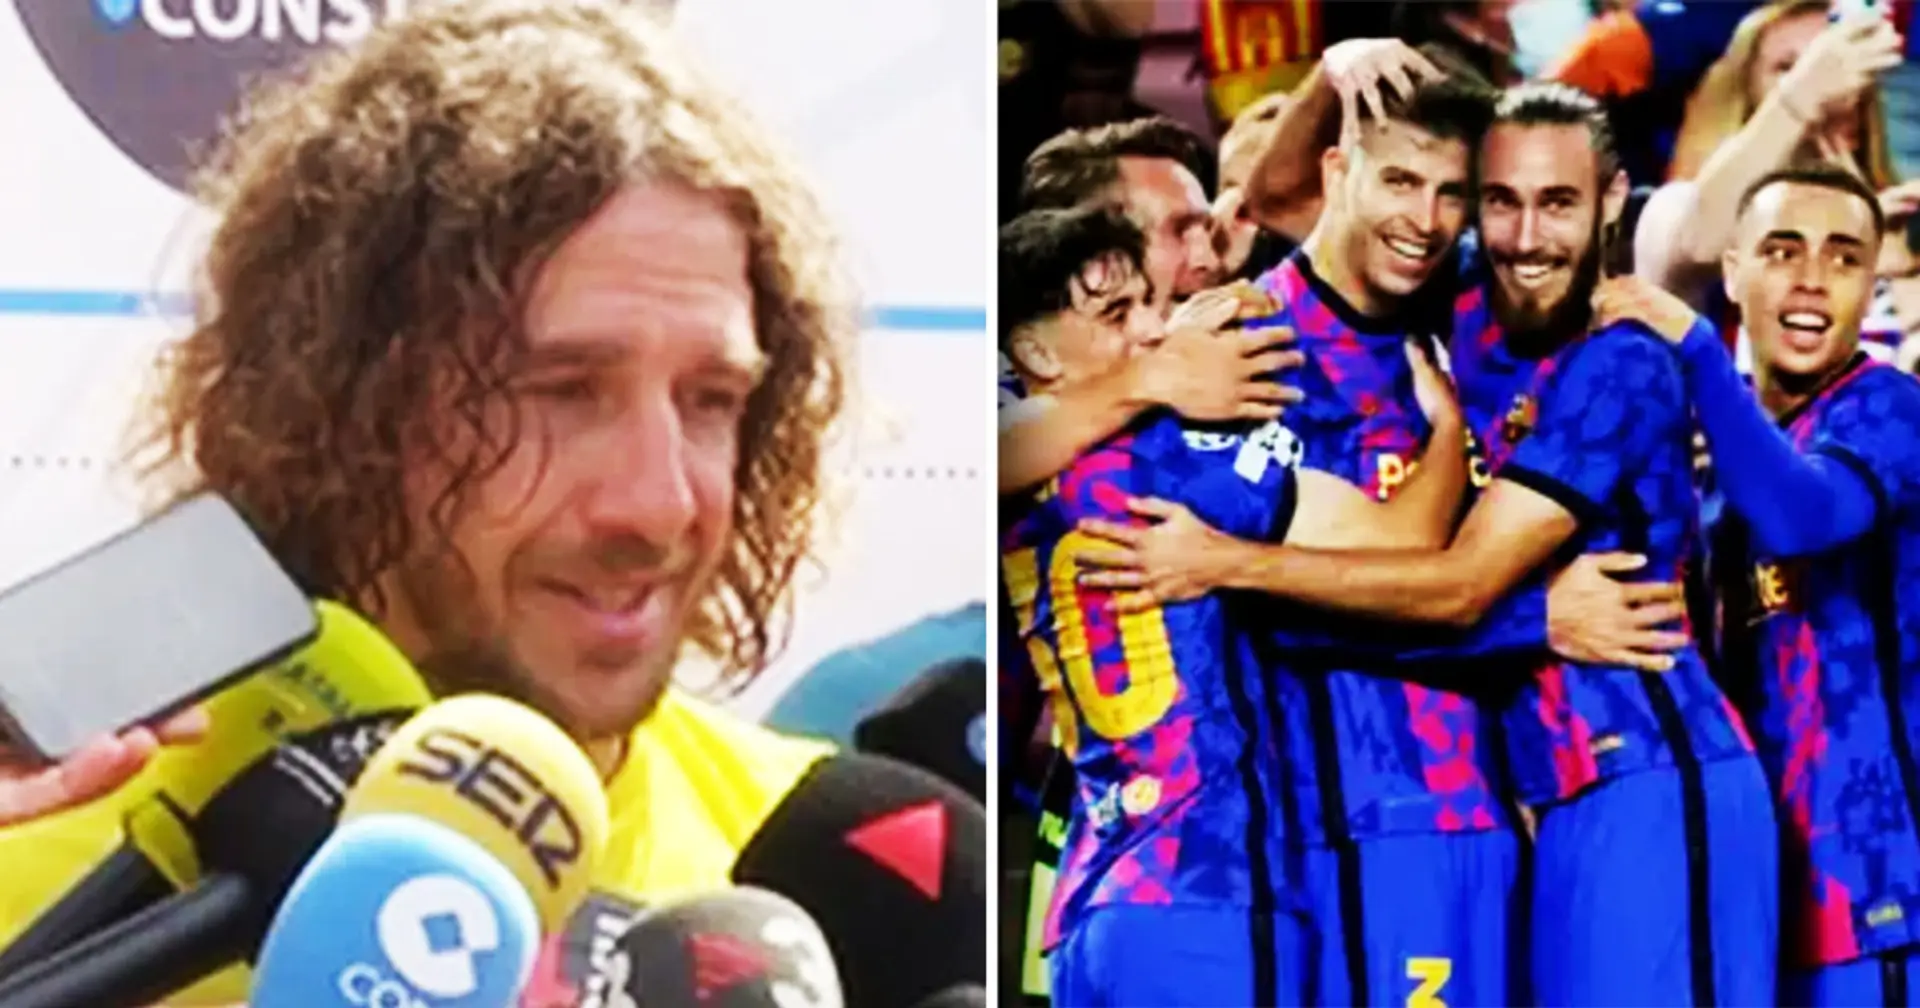 'They need to be ready': Puyol hints this might be the last season for 2 Barca players